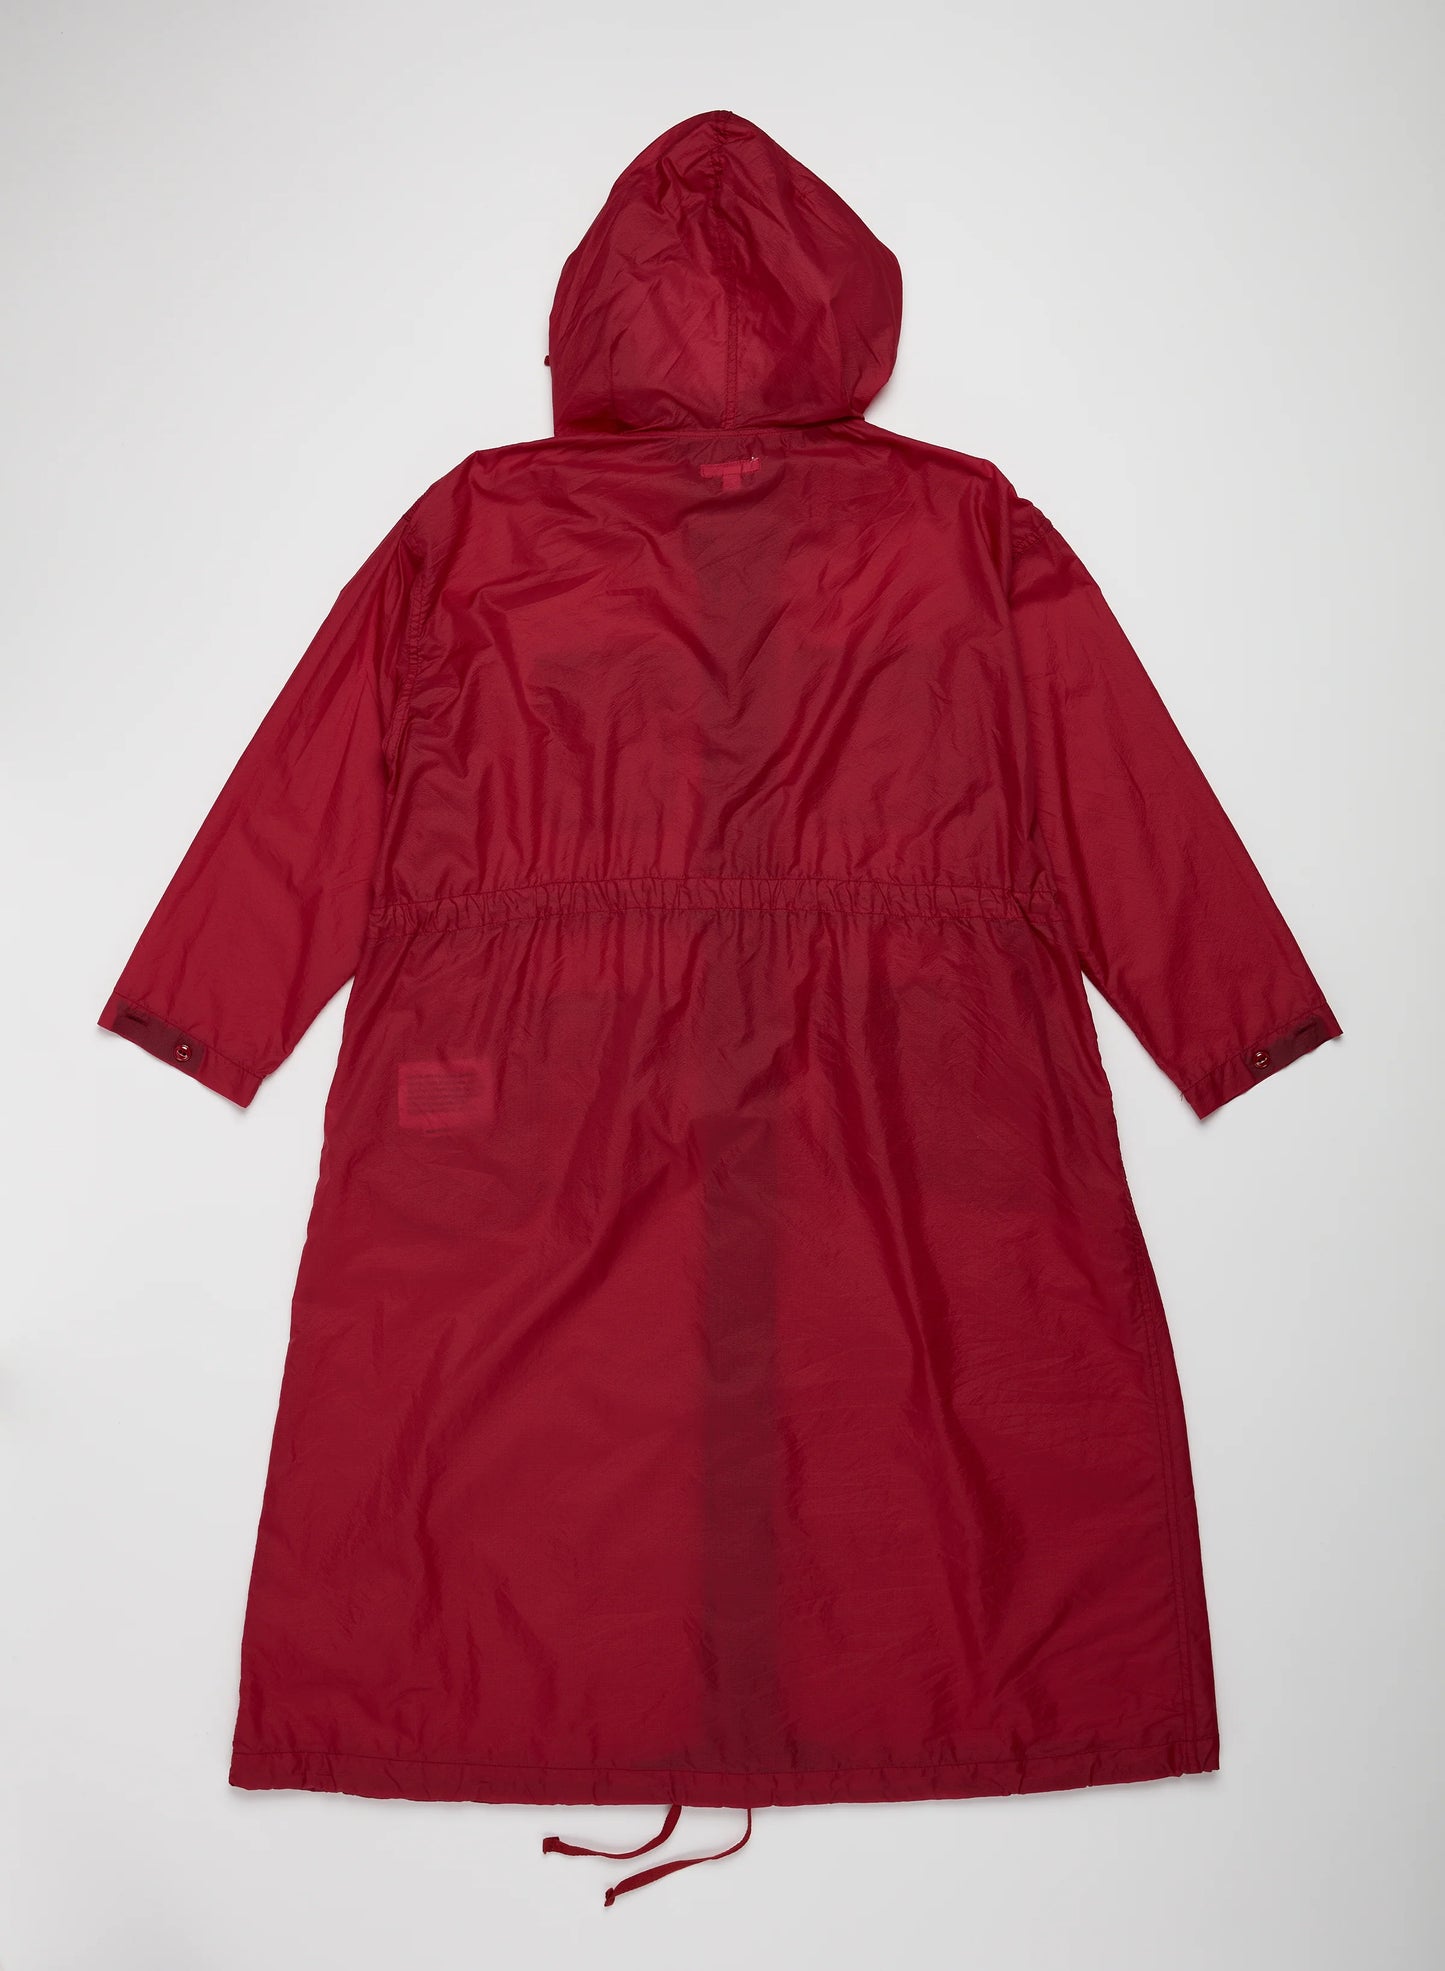 Engineered Garments Cagoule Dress in pink nylon ripstop